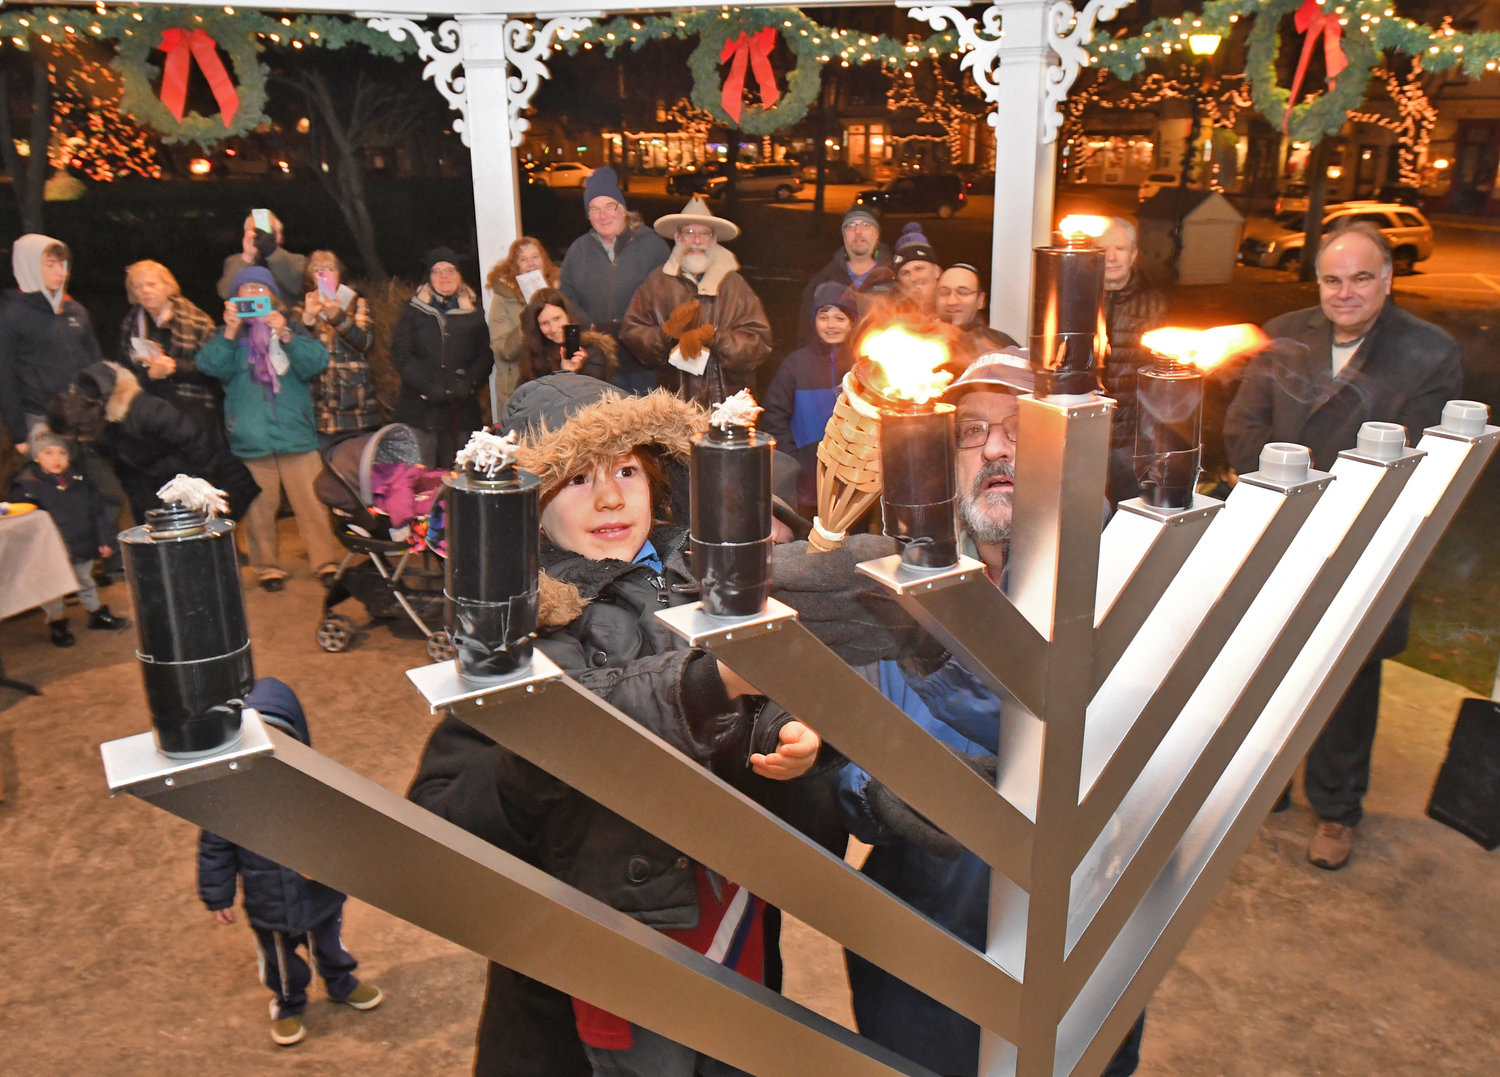 Leor Grysmintz, 4, gets help form Steven Marcus to light one of the candles of the menorah in the gazebo in Clinton in this file photo.